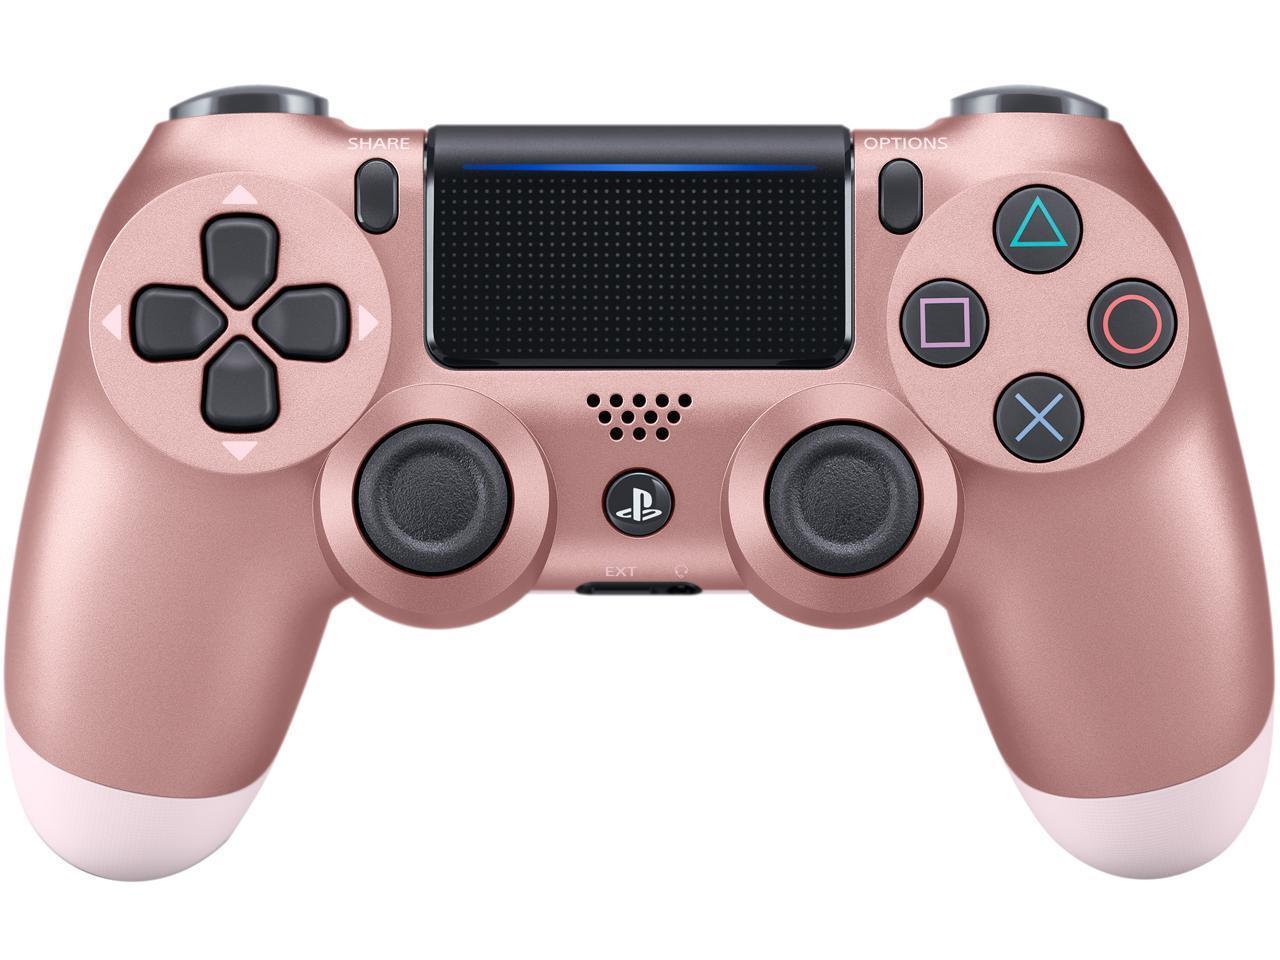 OEM DualShock 4 Wireless Controller for Sony PlayStation 4 - Rose Gold (CUH-ZCT2)